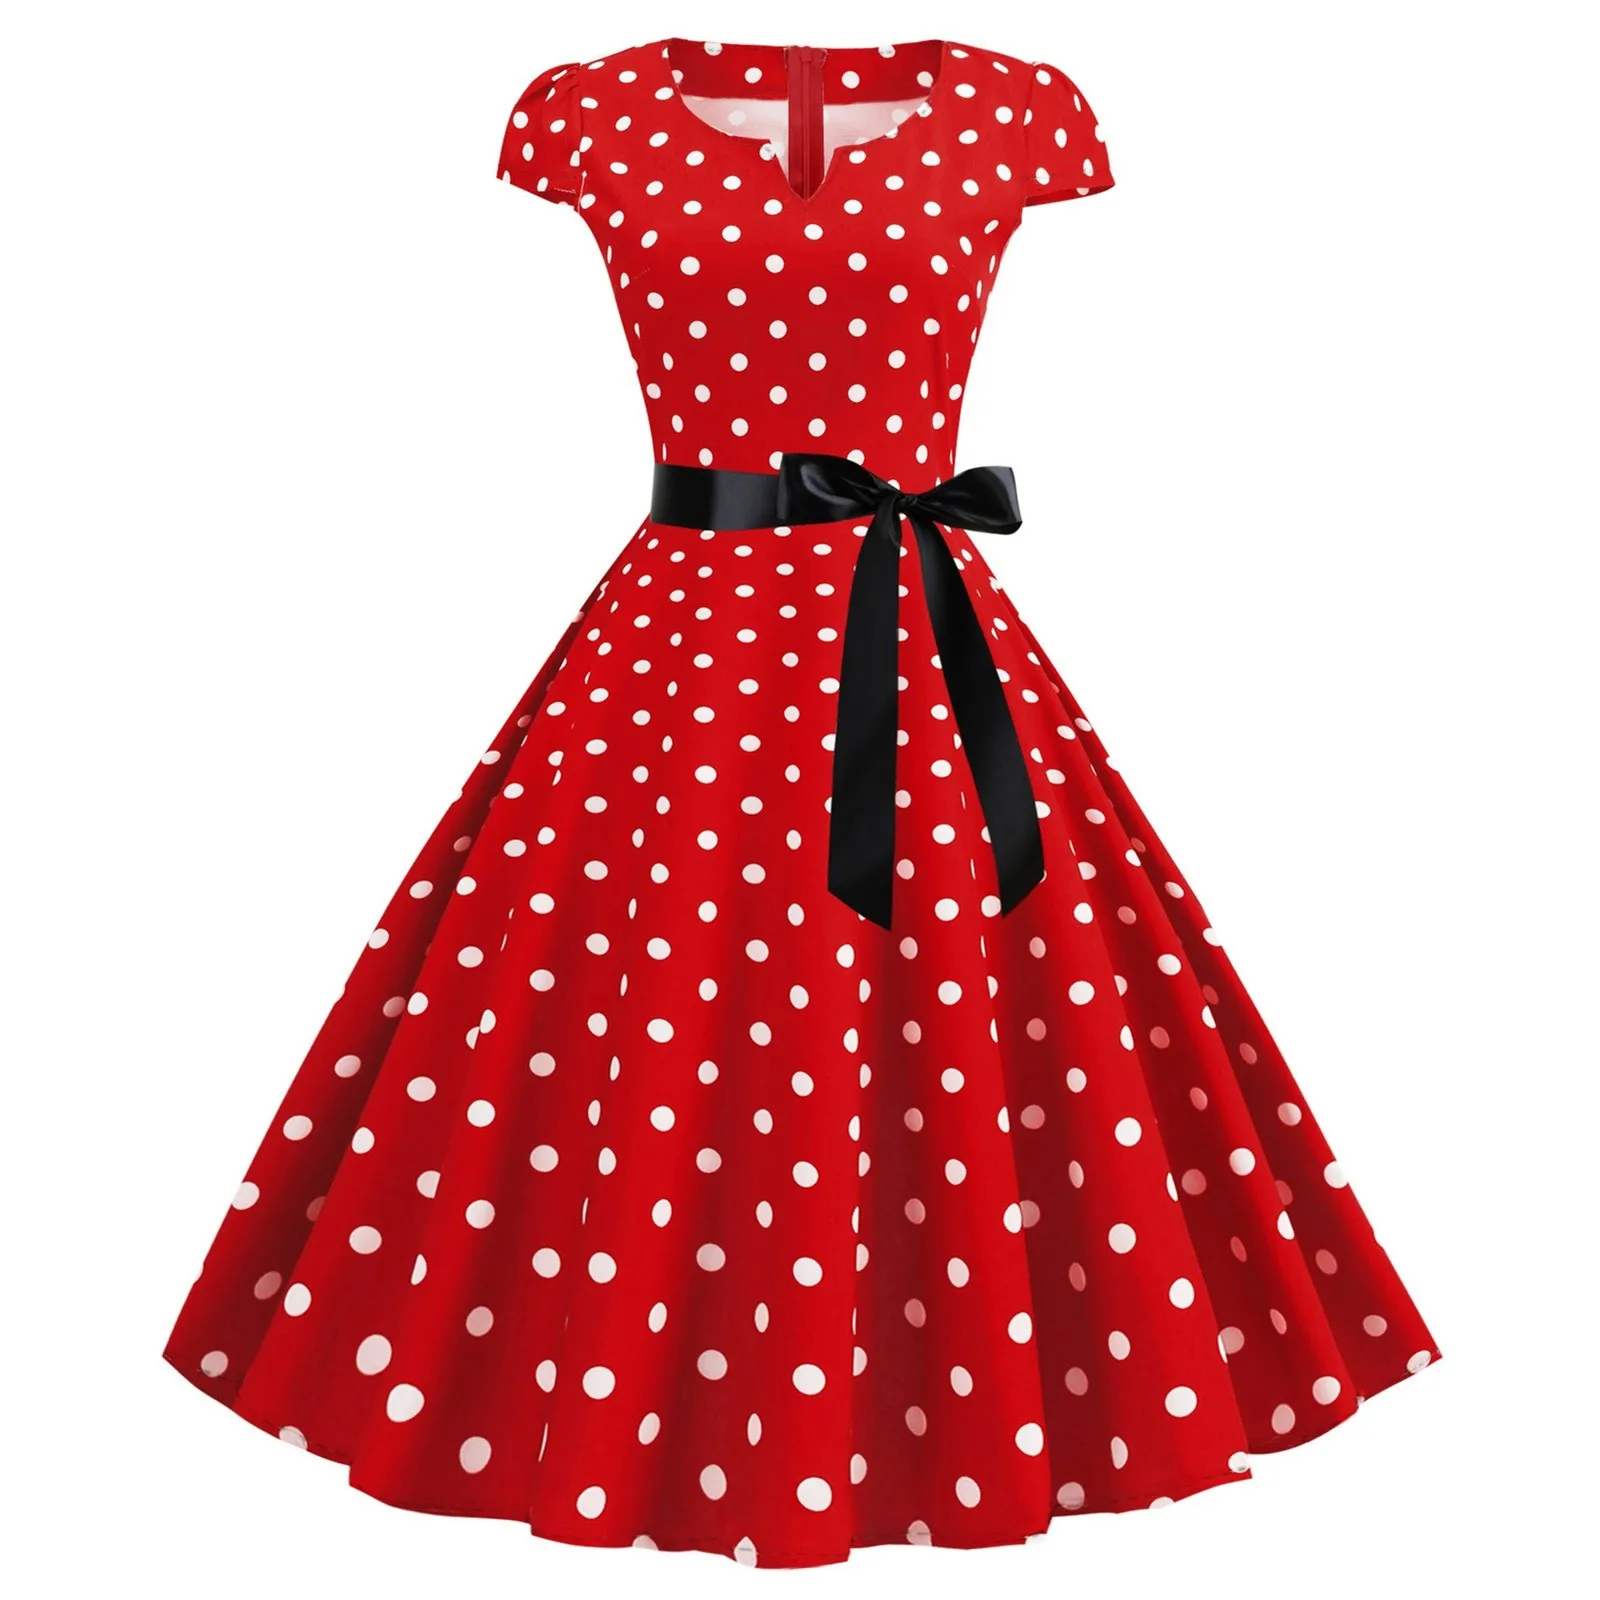 

Retro Women Polka Dot Dress Short Sleeve 1950s Housewife Evening Party Prom Dress Female Lace-Up A-Line Swing Dresses